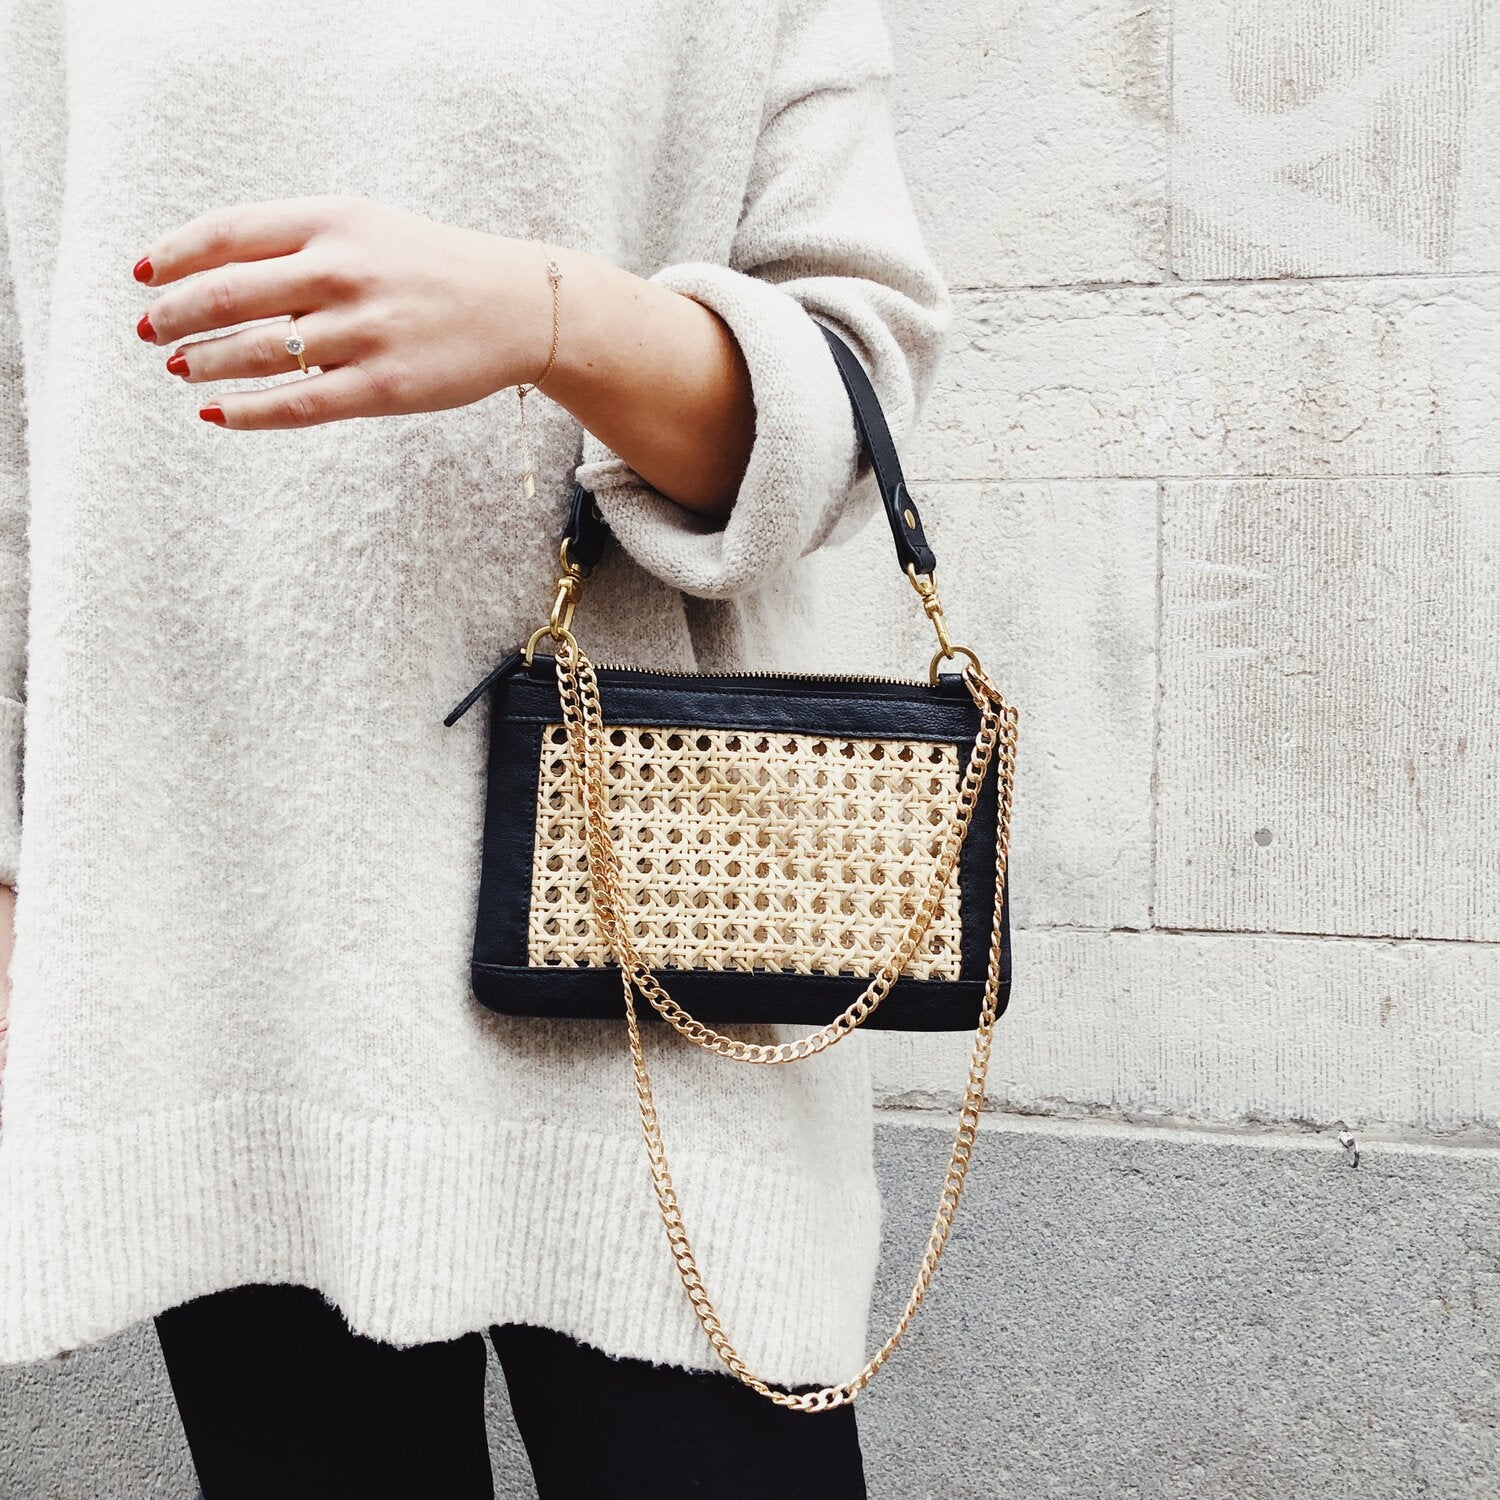 Meet Our Latest Obsession - The Iconic Rattan Bag